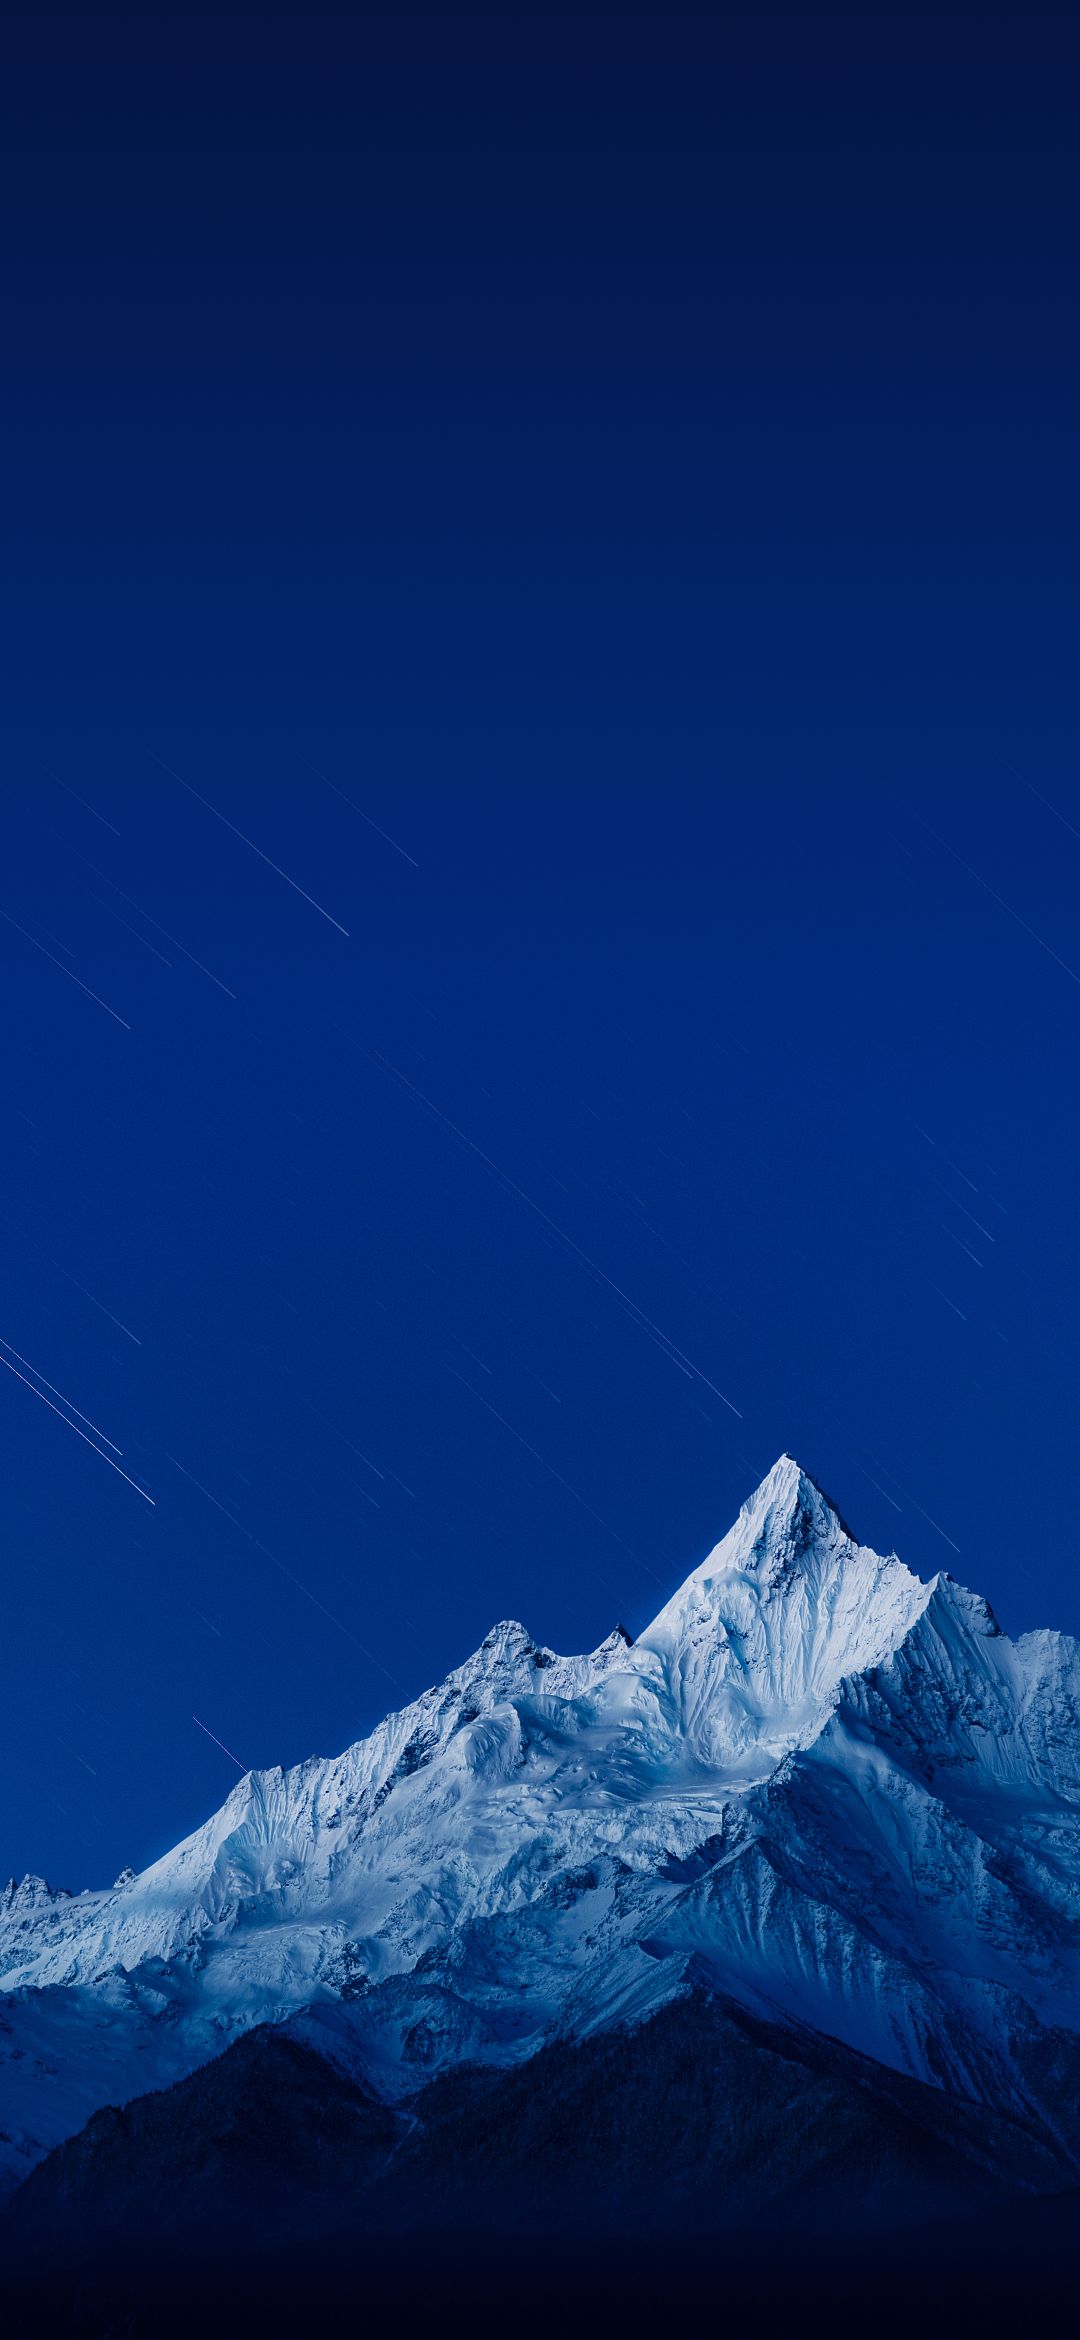 Mountain Phone Wallpapers